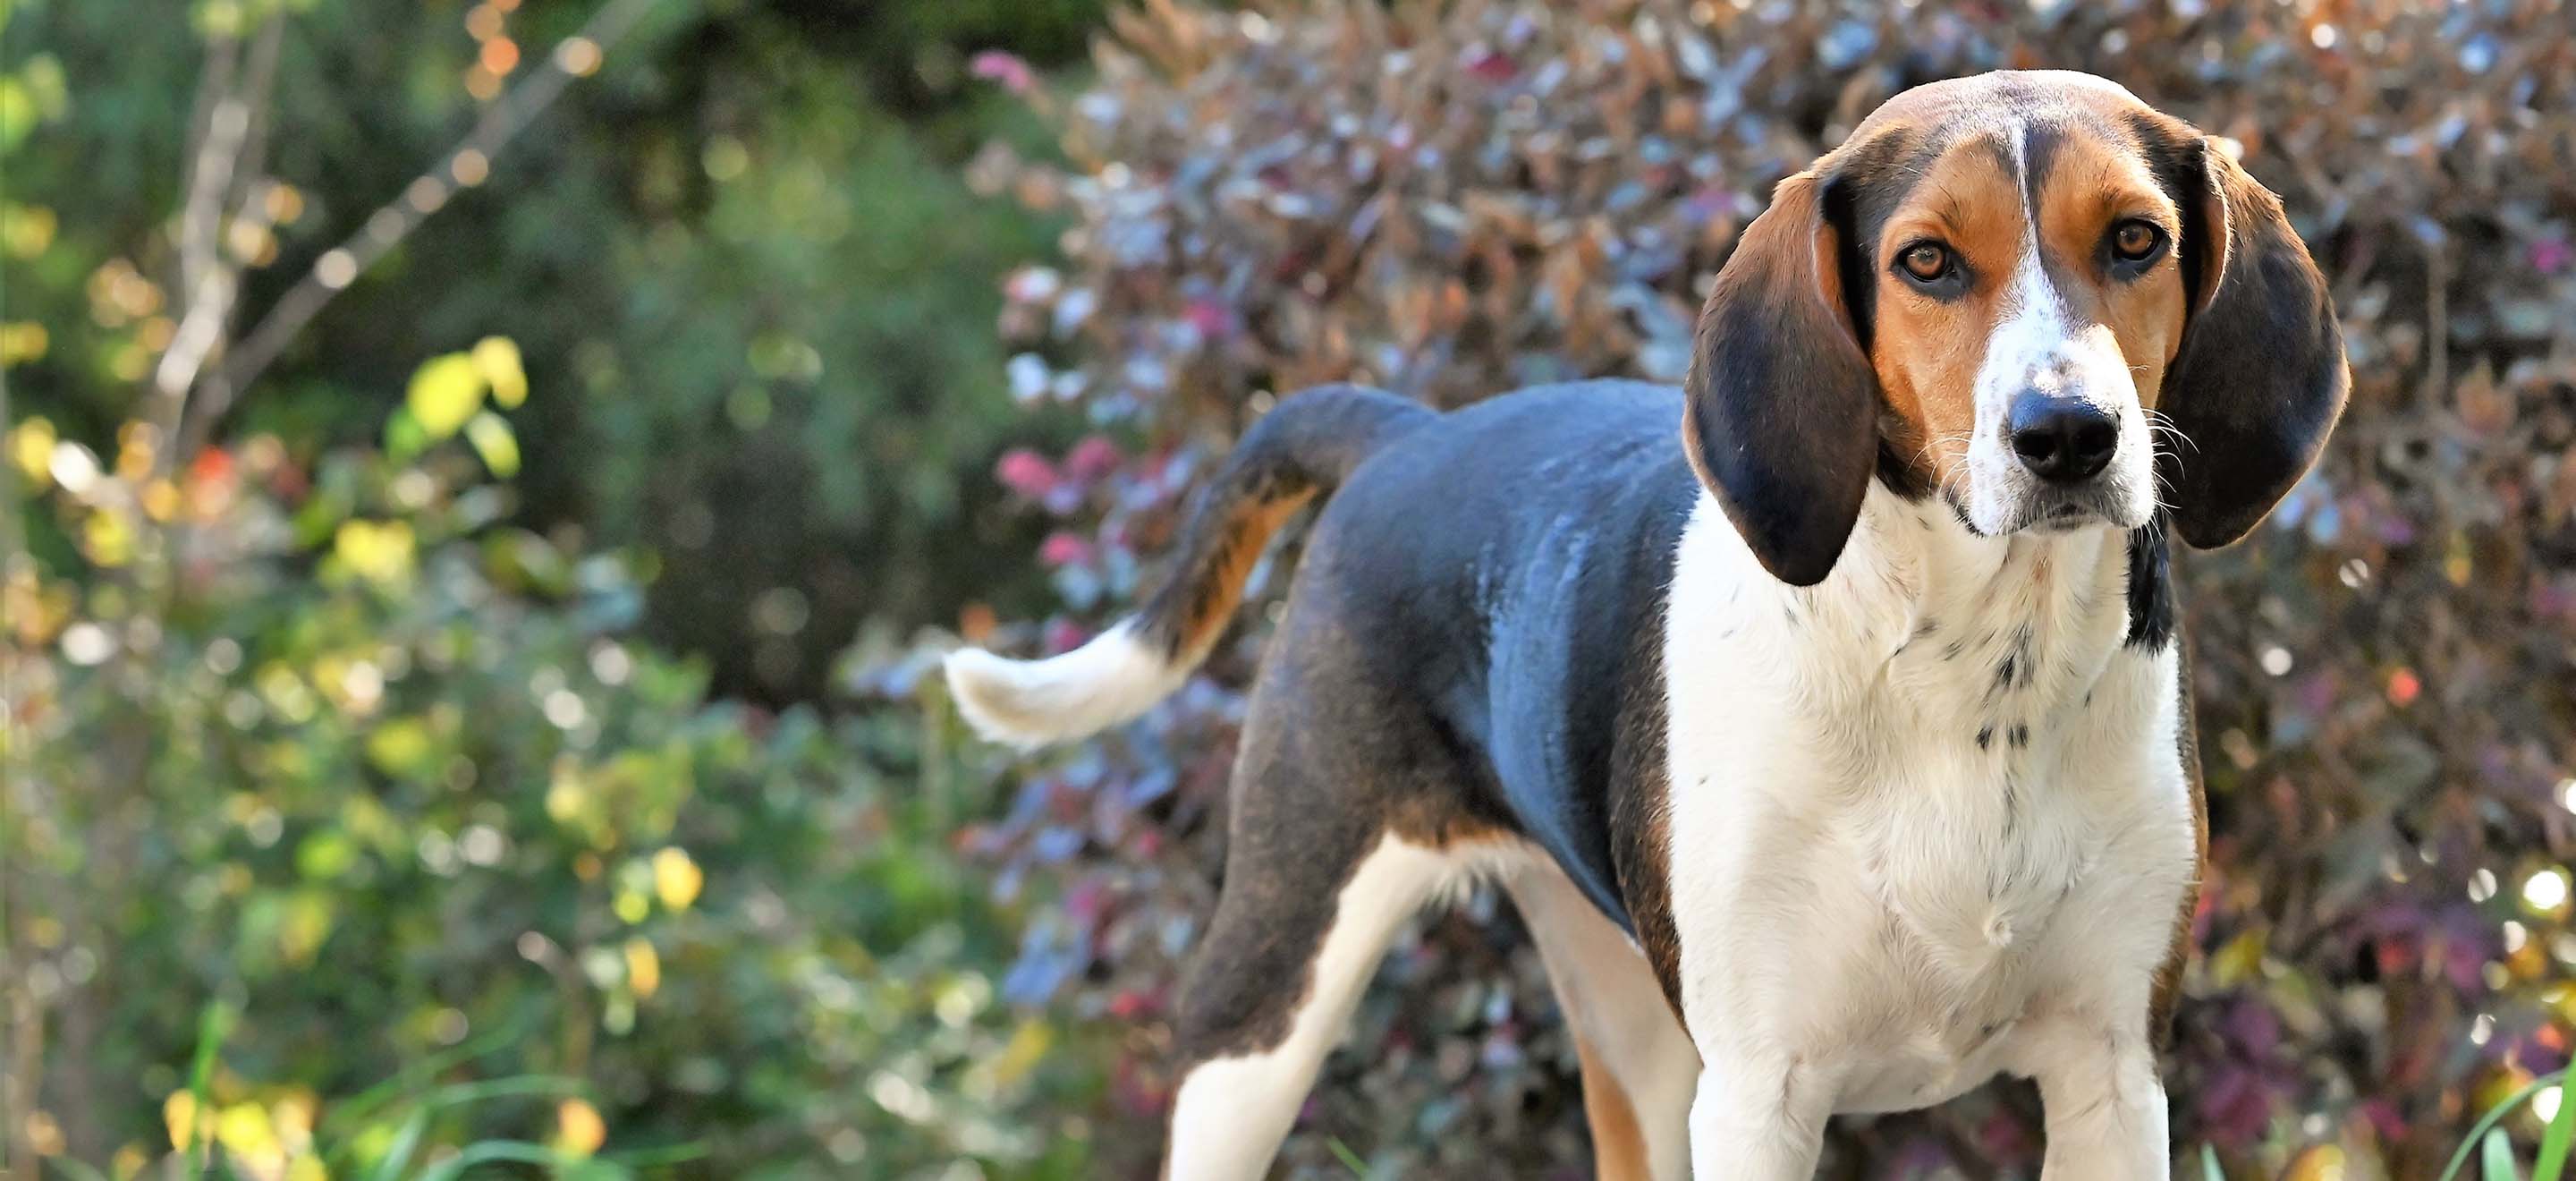 A Treeing Walker Coonhound dog standing amongst the foliage in the yard image